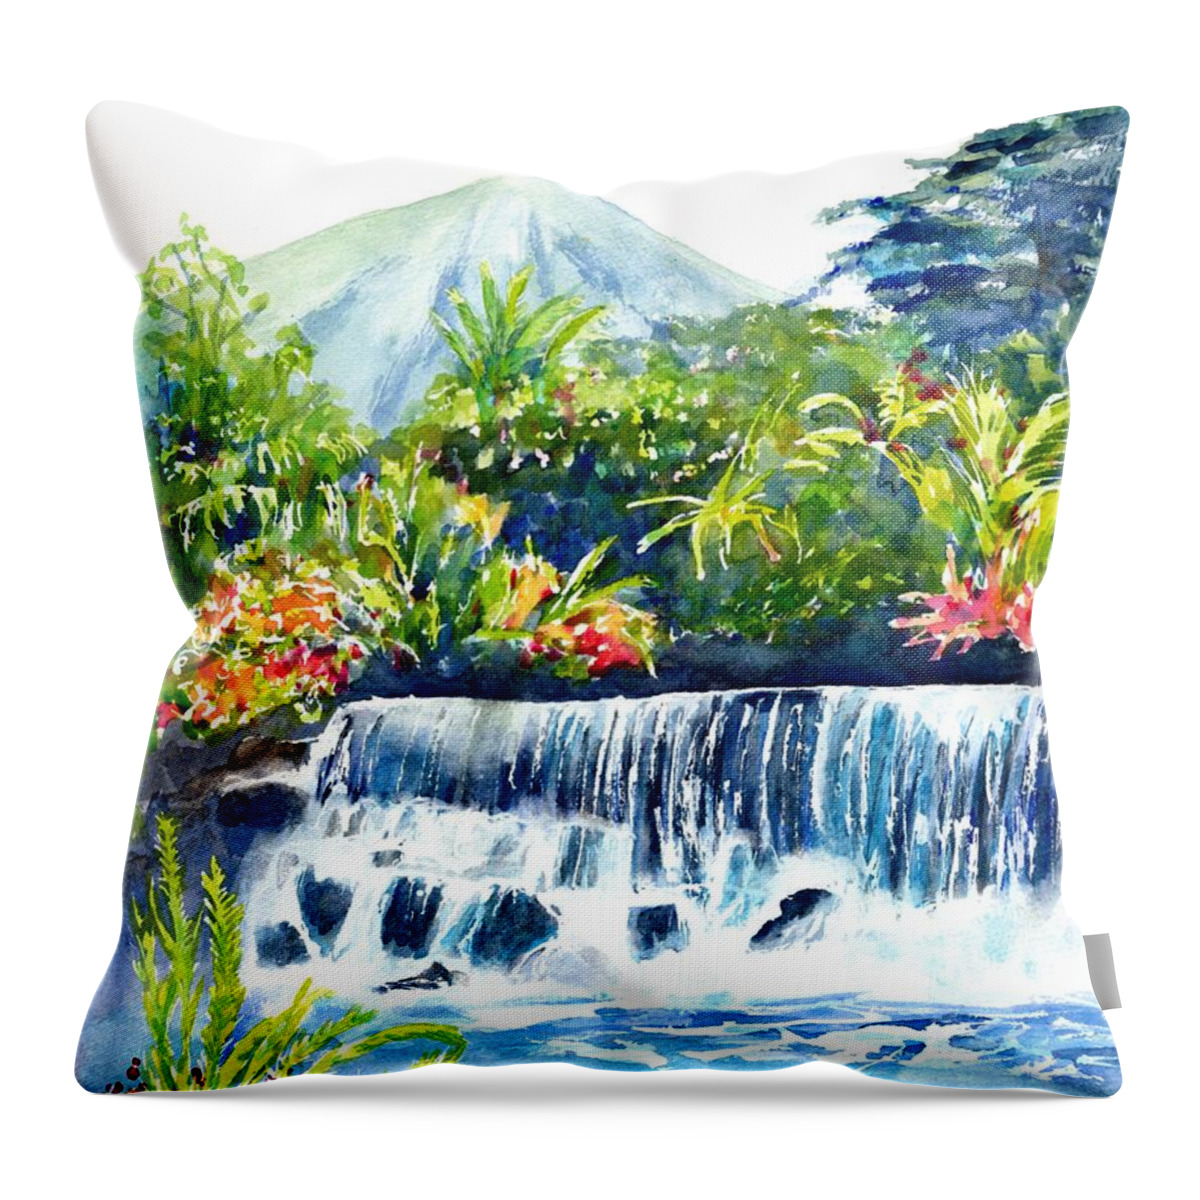 Costa Rica Throw Pillow featuring the painting Arenal Volcano Costa Rica by Carlin Blahnik CarlinArtWatercolor